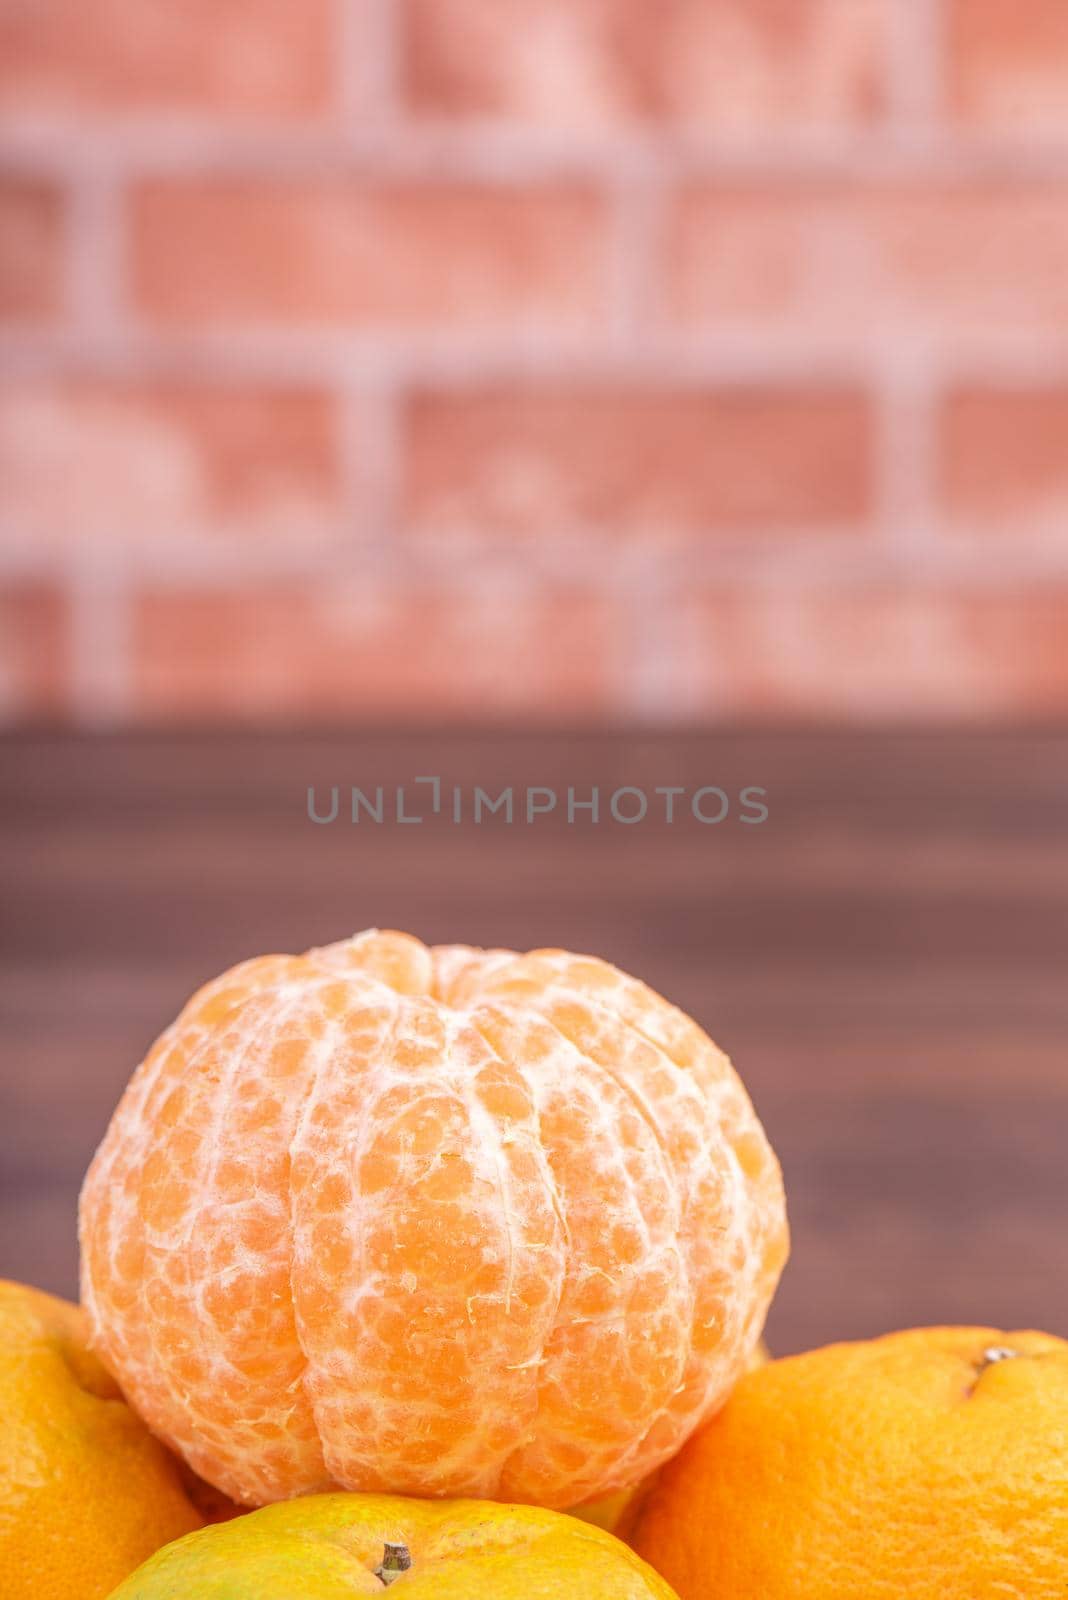 Peeled tangerines in a bamboo sieve basket on dark wooden table with red brick wall background, Chinese lunar new year fruit design concept, close up.